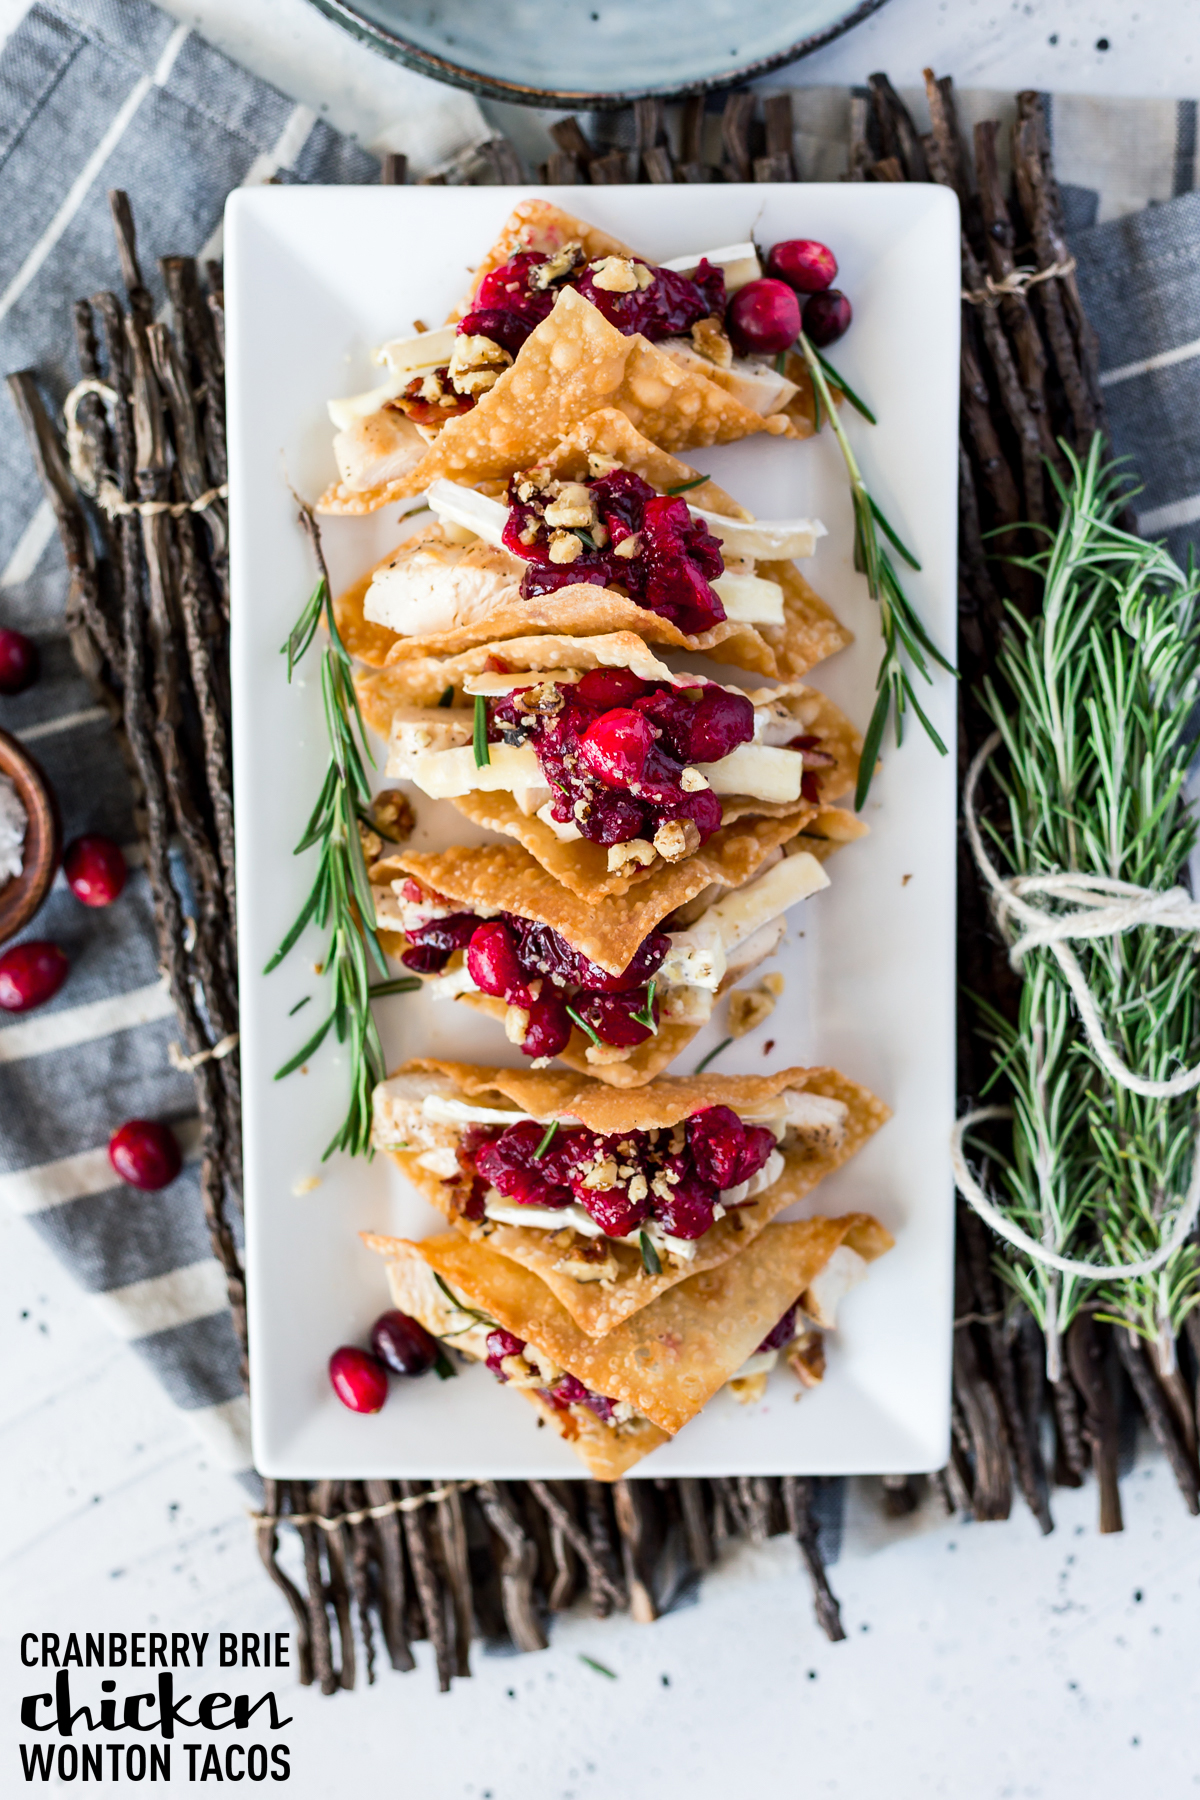 Cranberry Brie Chicken appetizer